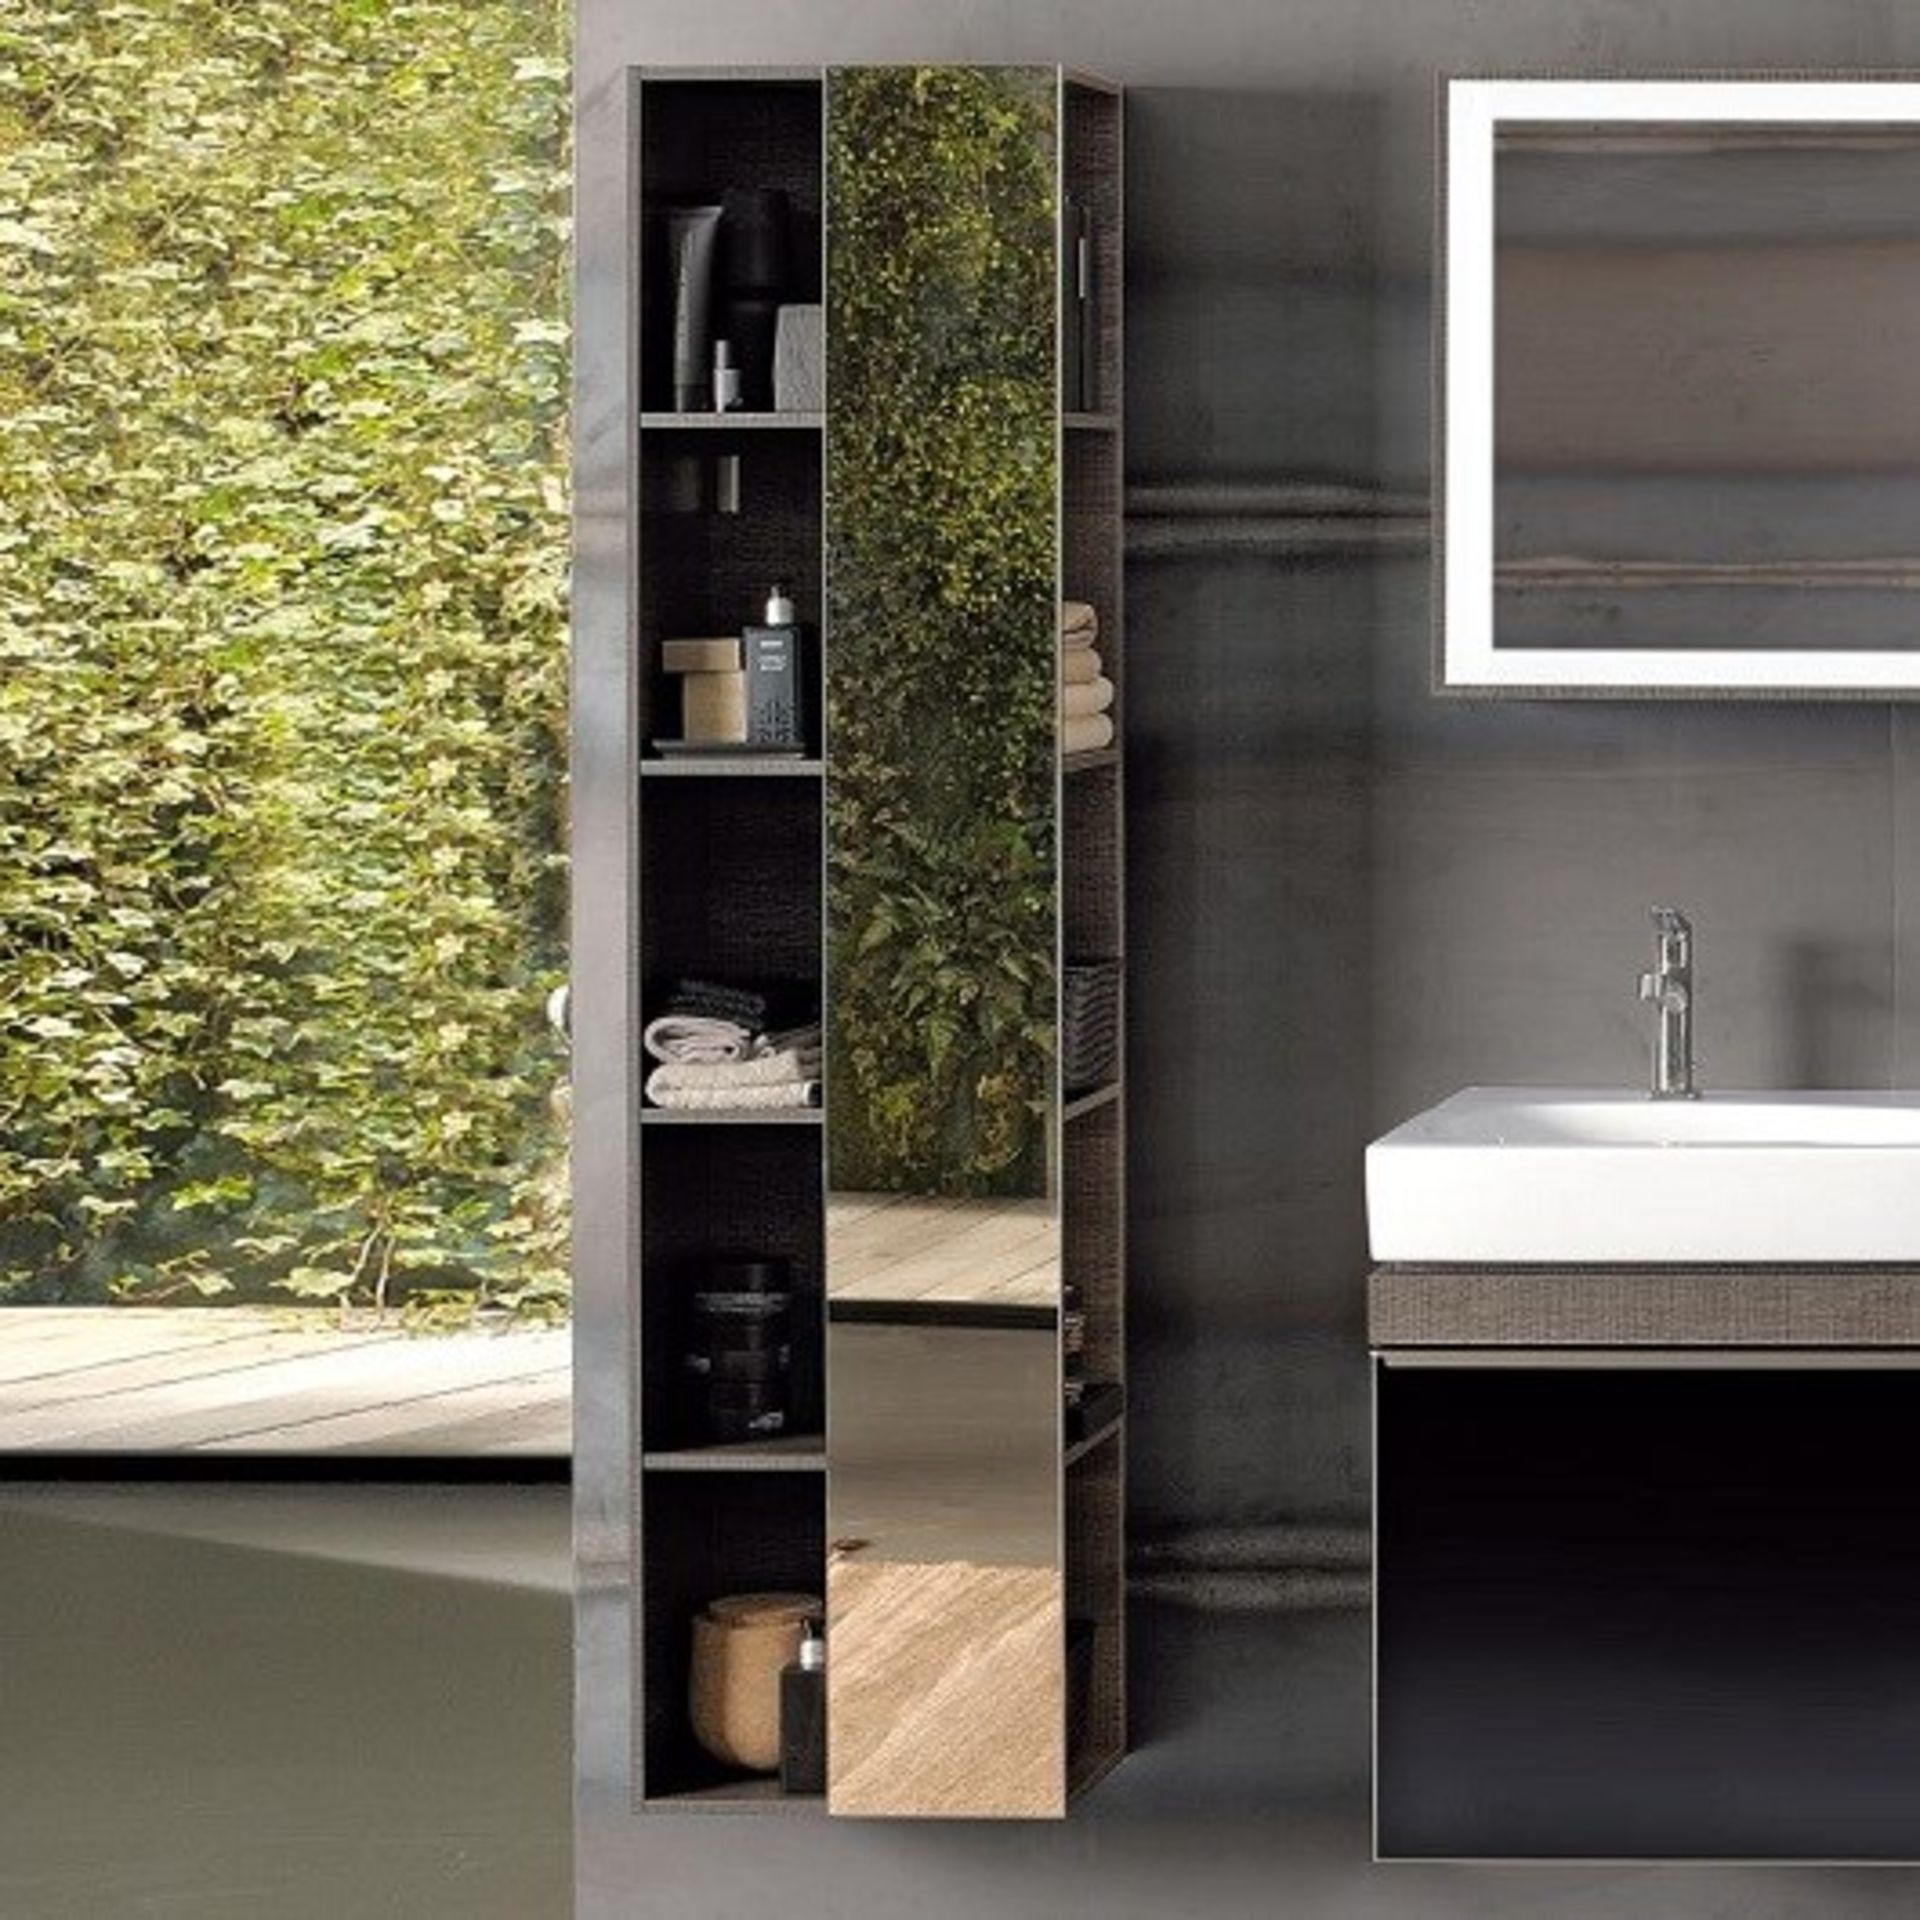 (PC4) 1600mm Keramag Citterio Grey/Brown Shelves with Mirror Tall Cabinet. RRP £865.99.Wood st...( - Image 4 of 4